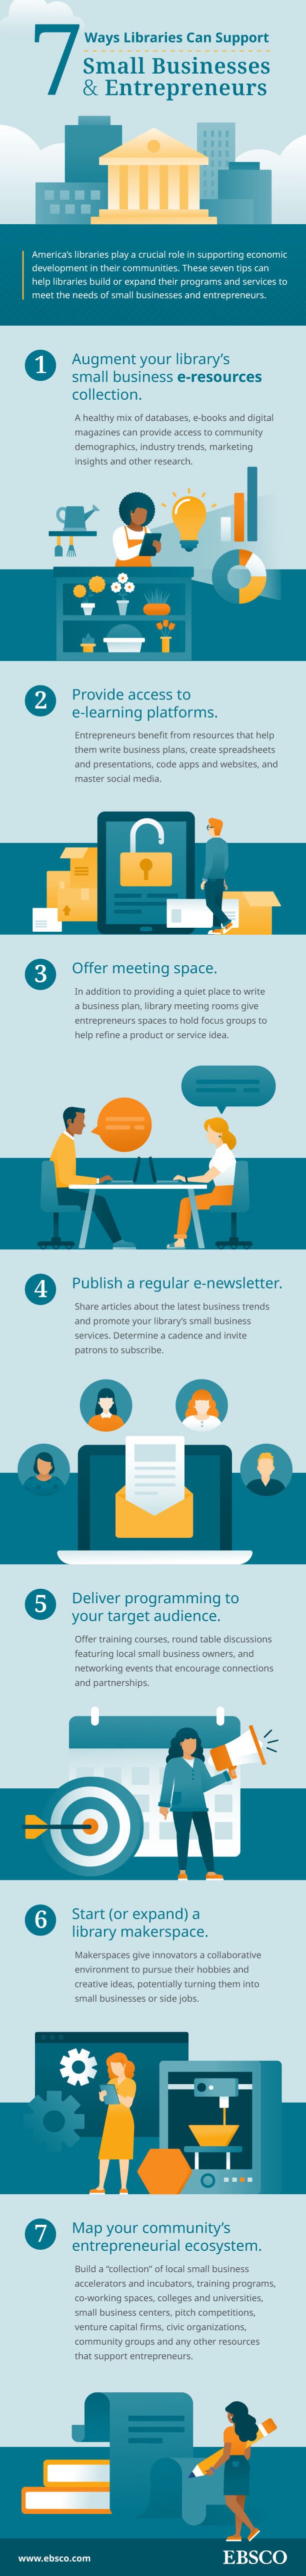  Ways Libraries Can Support Entrepreneurs Infographic   